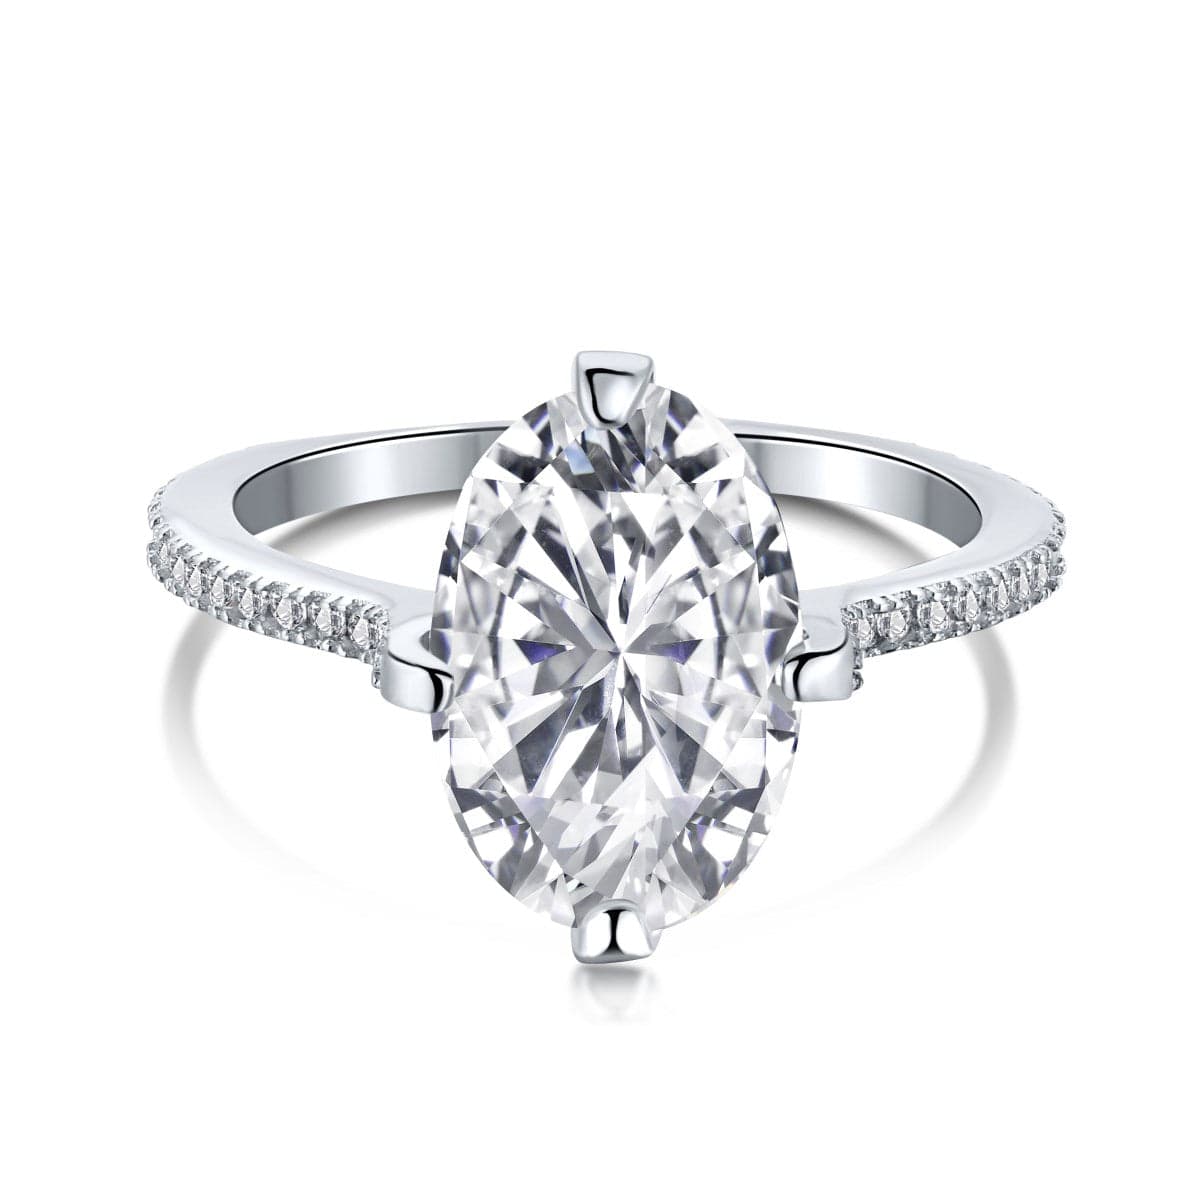 3 ct - Paris Oval Shaped Ring